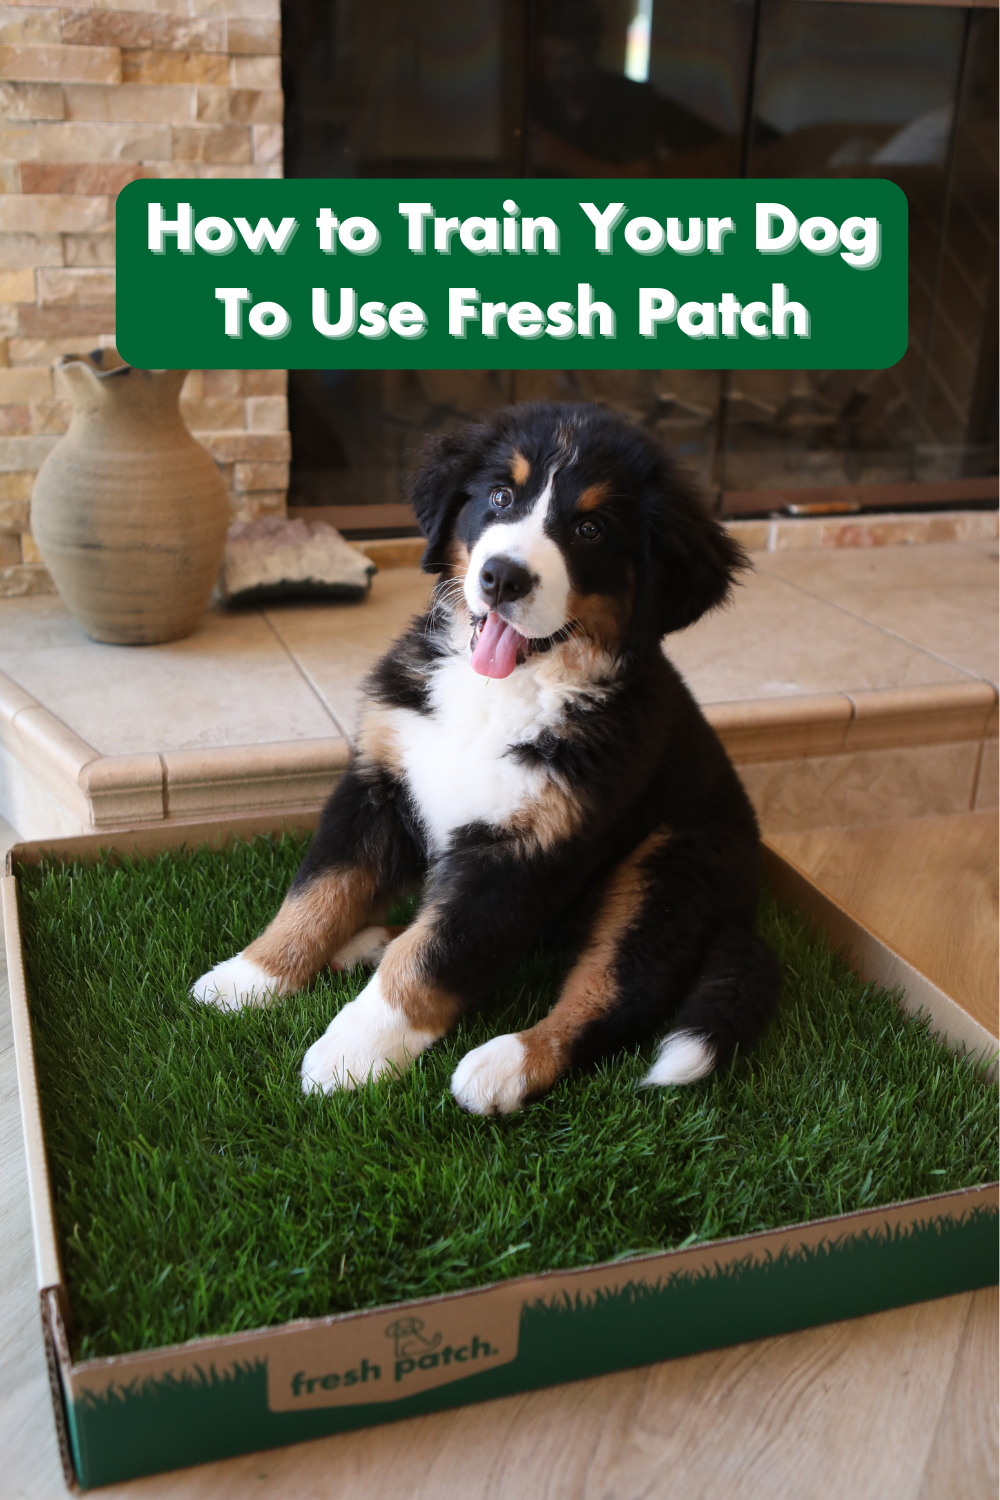 Large Plastic Tray for Fresh Patch Dog Grass Pee Pad